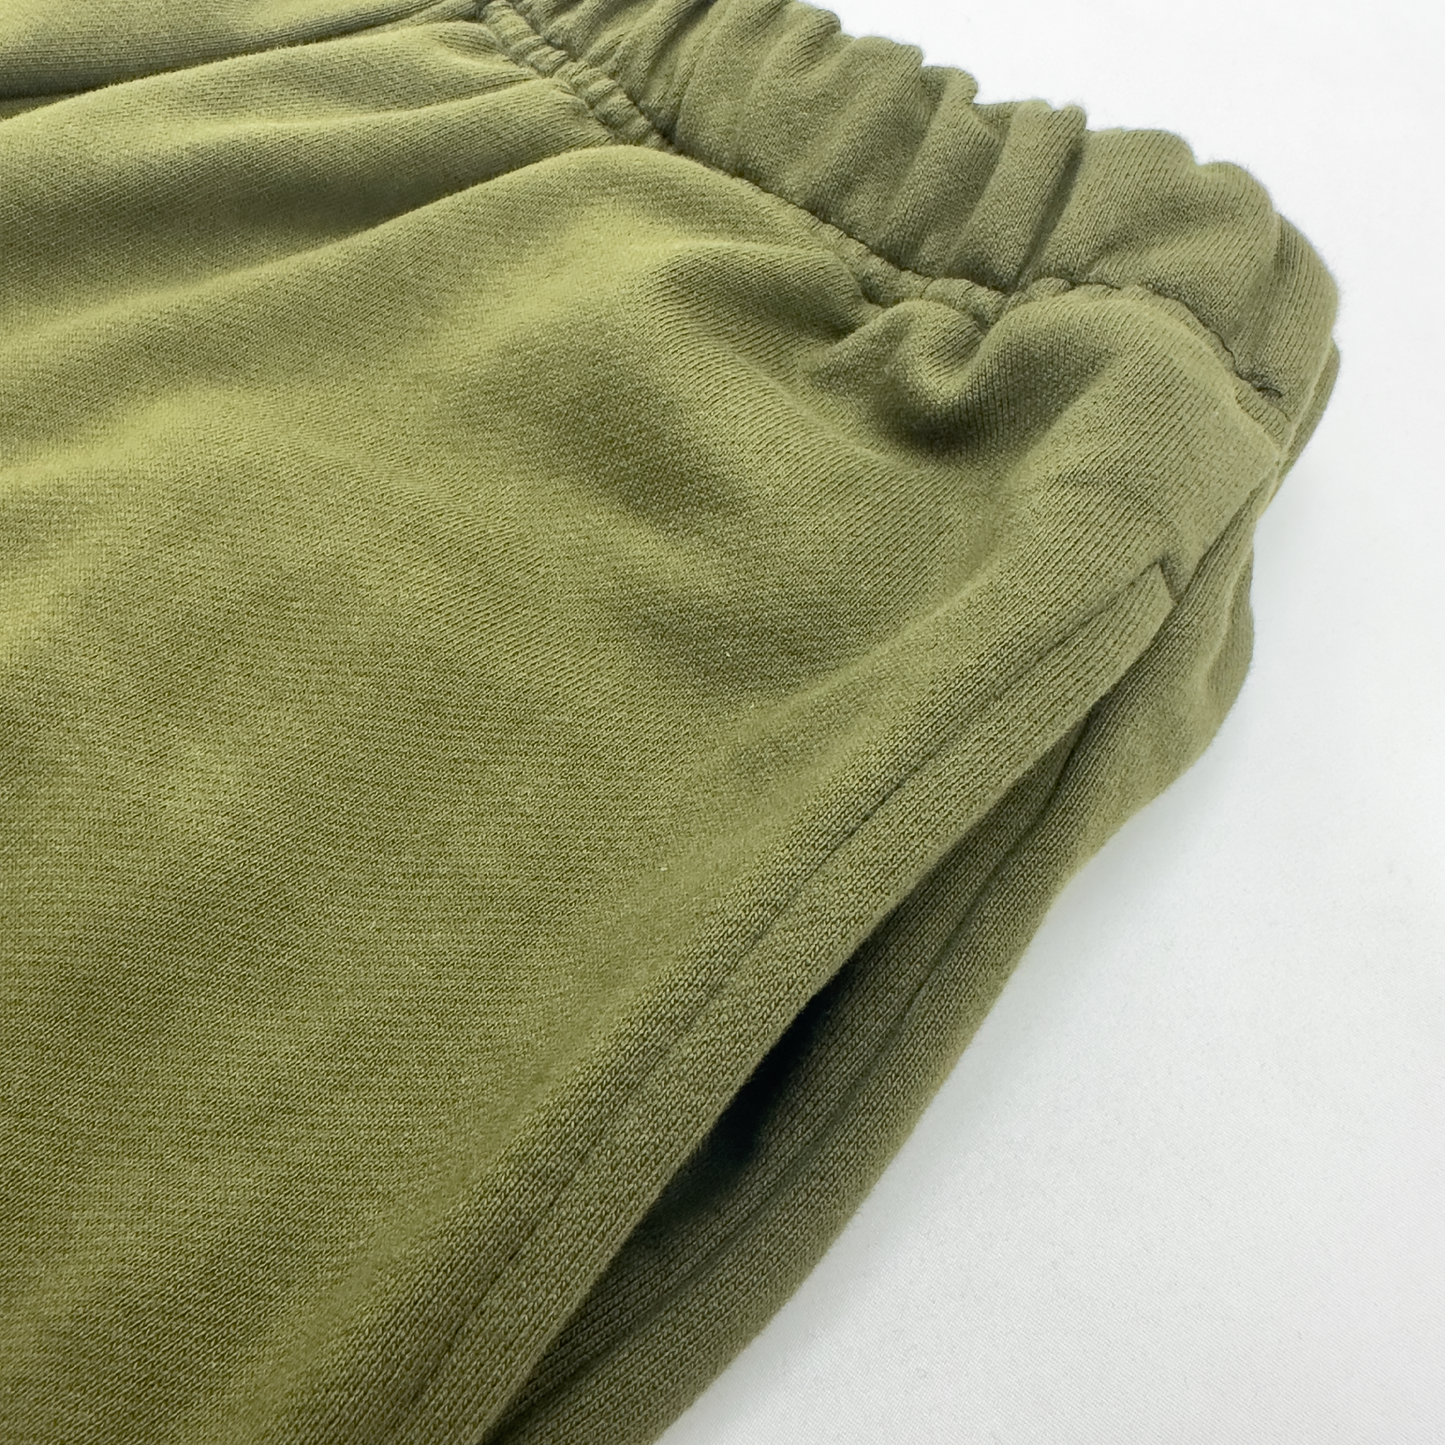 500 GSM 'Olive' French Terry Cotton Sweatpants